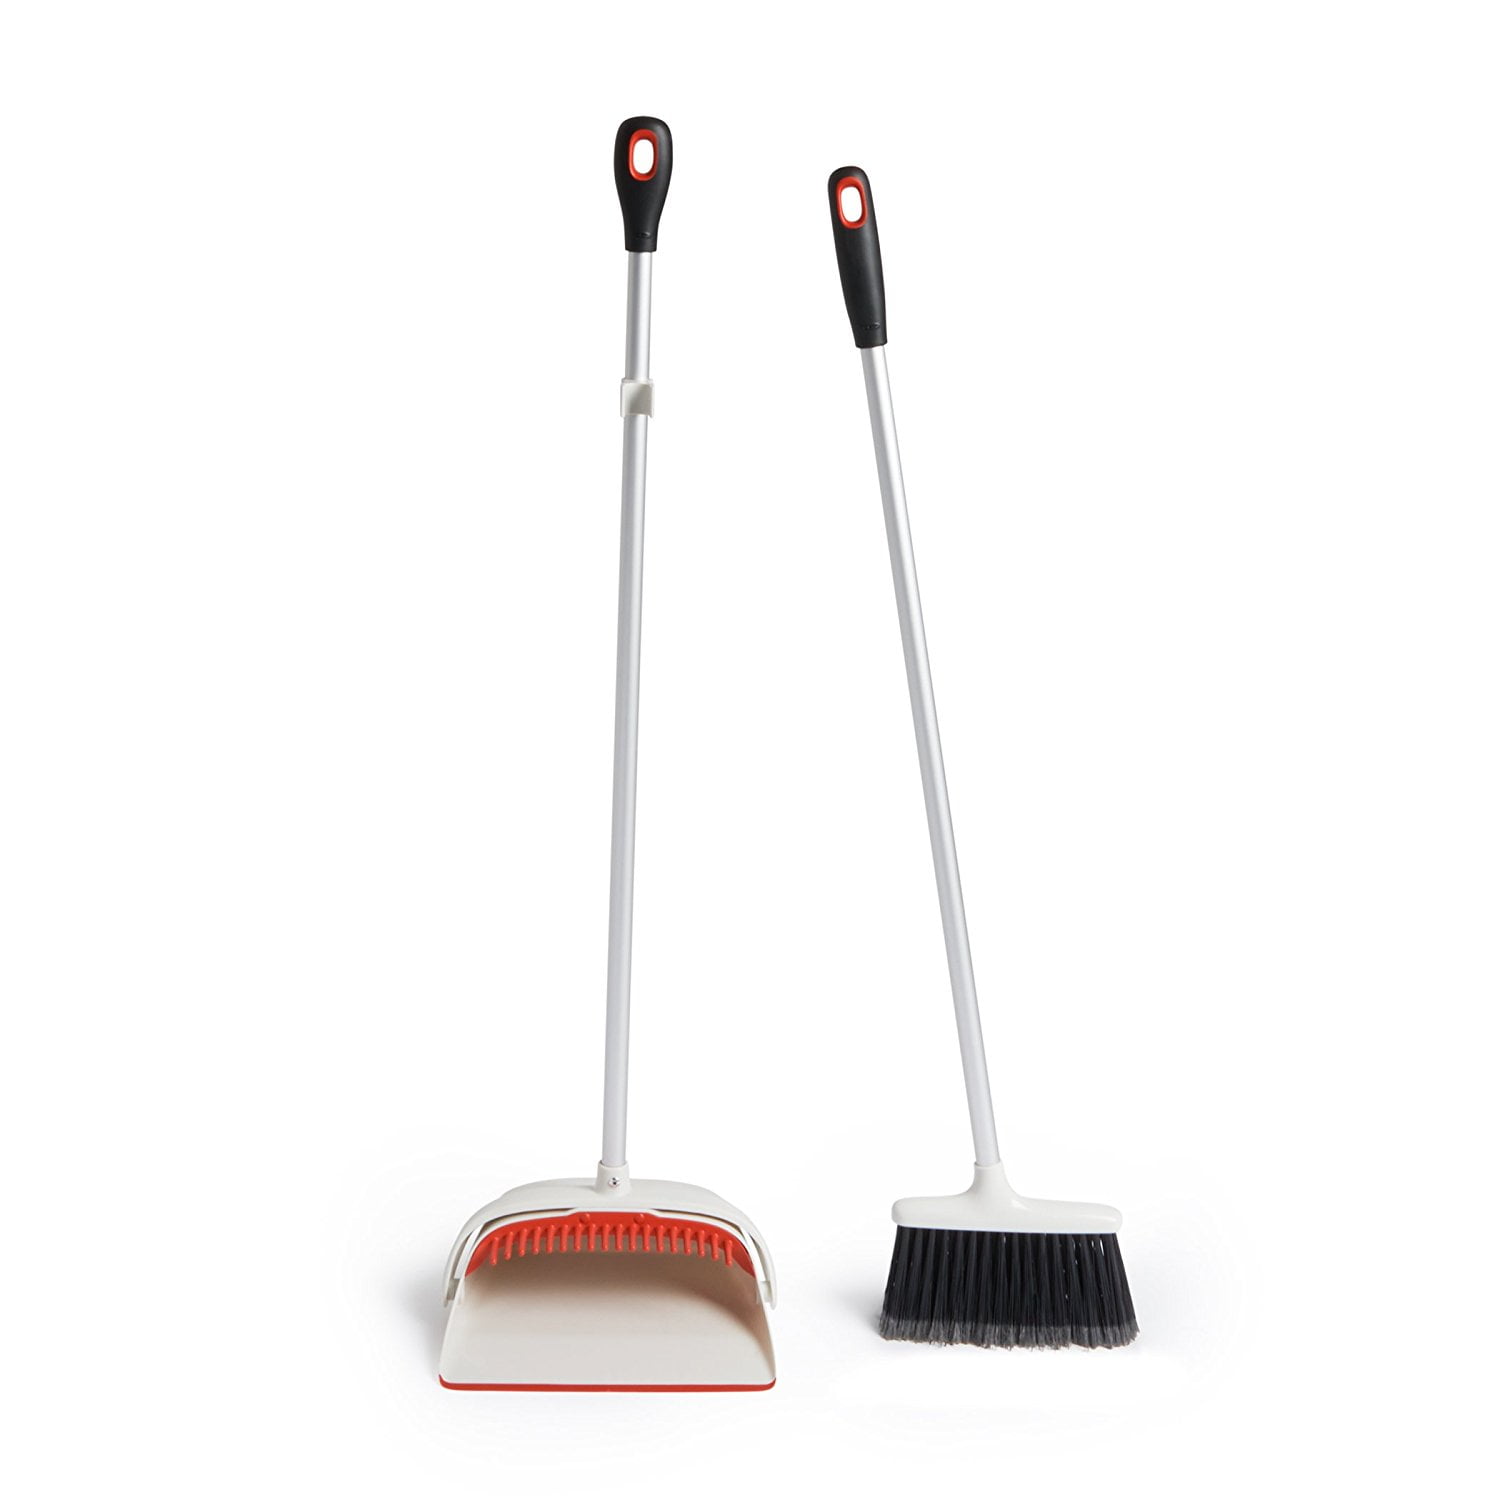 Standing Upright Grips Sweep Set with Long Handle Angle Broom and Lobby Dust pan 